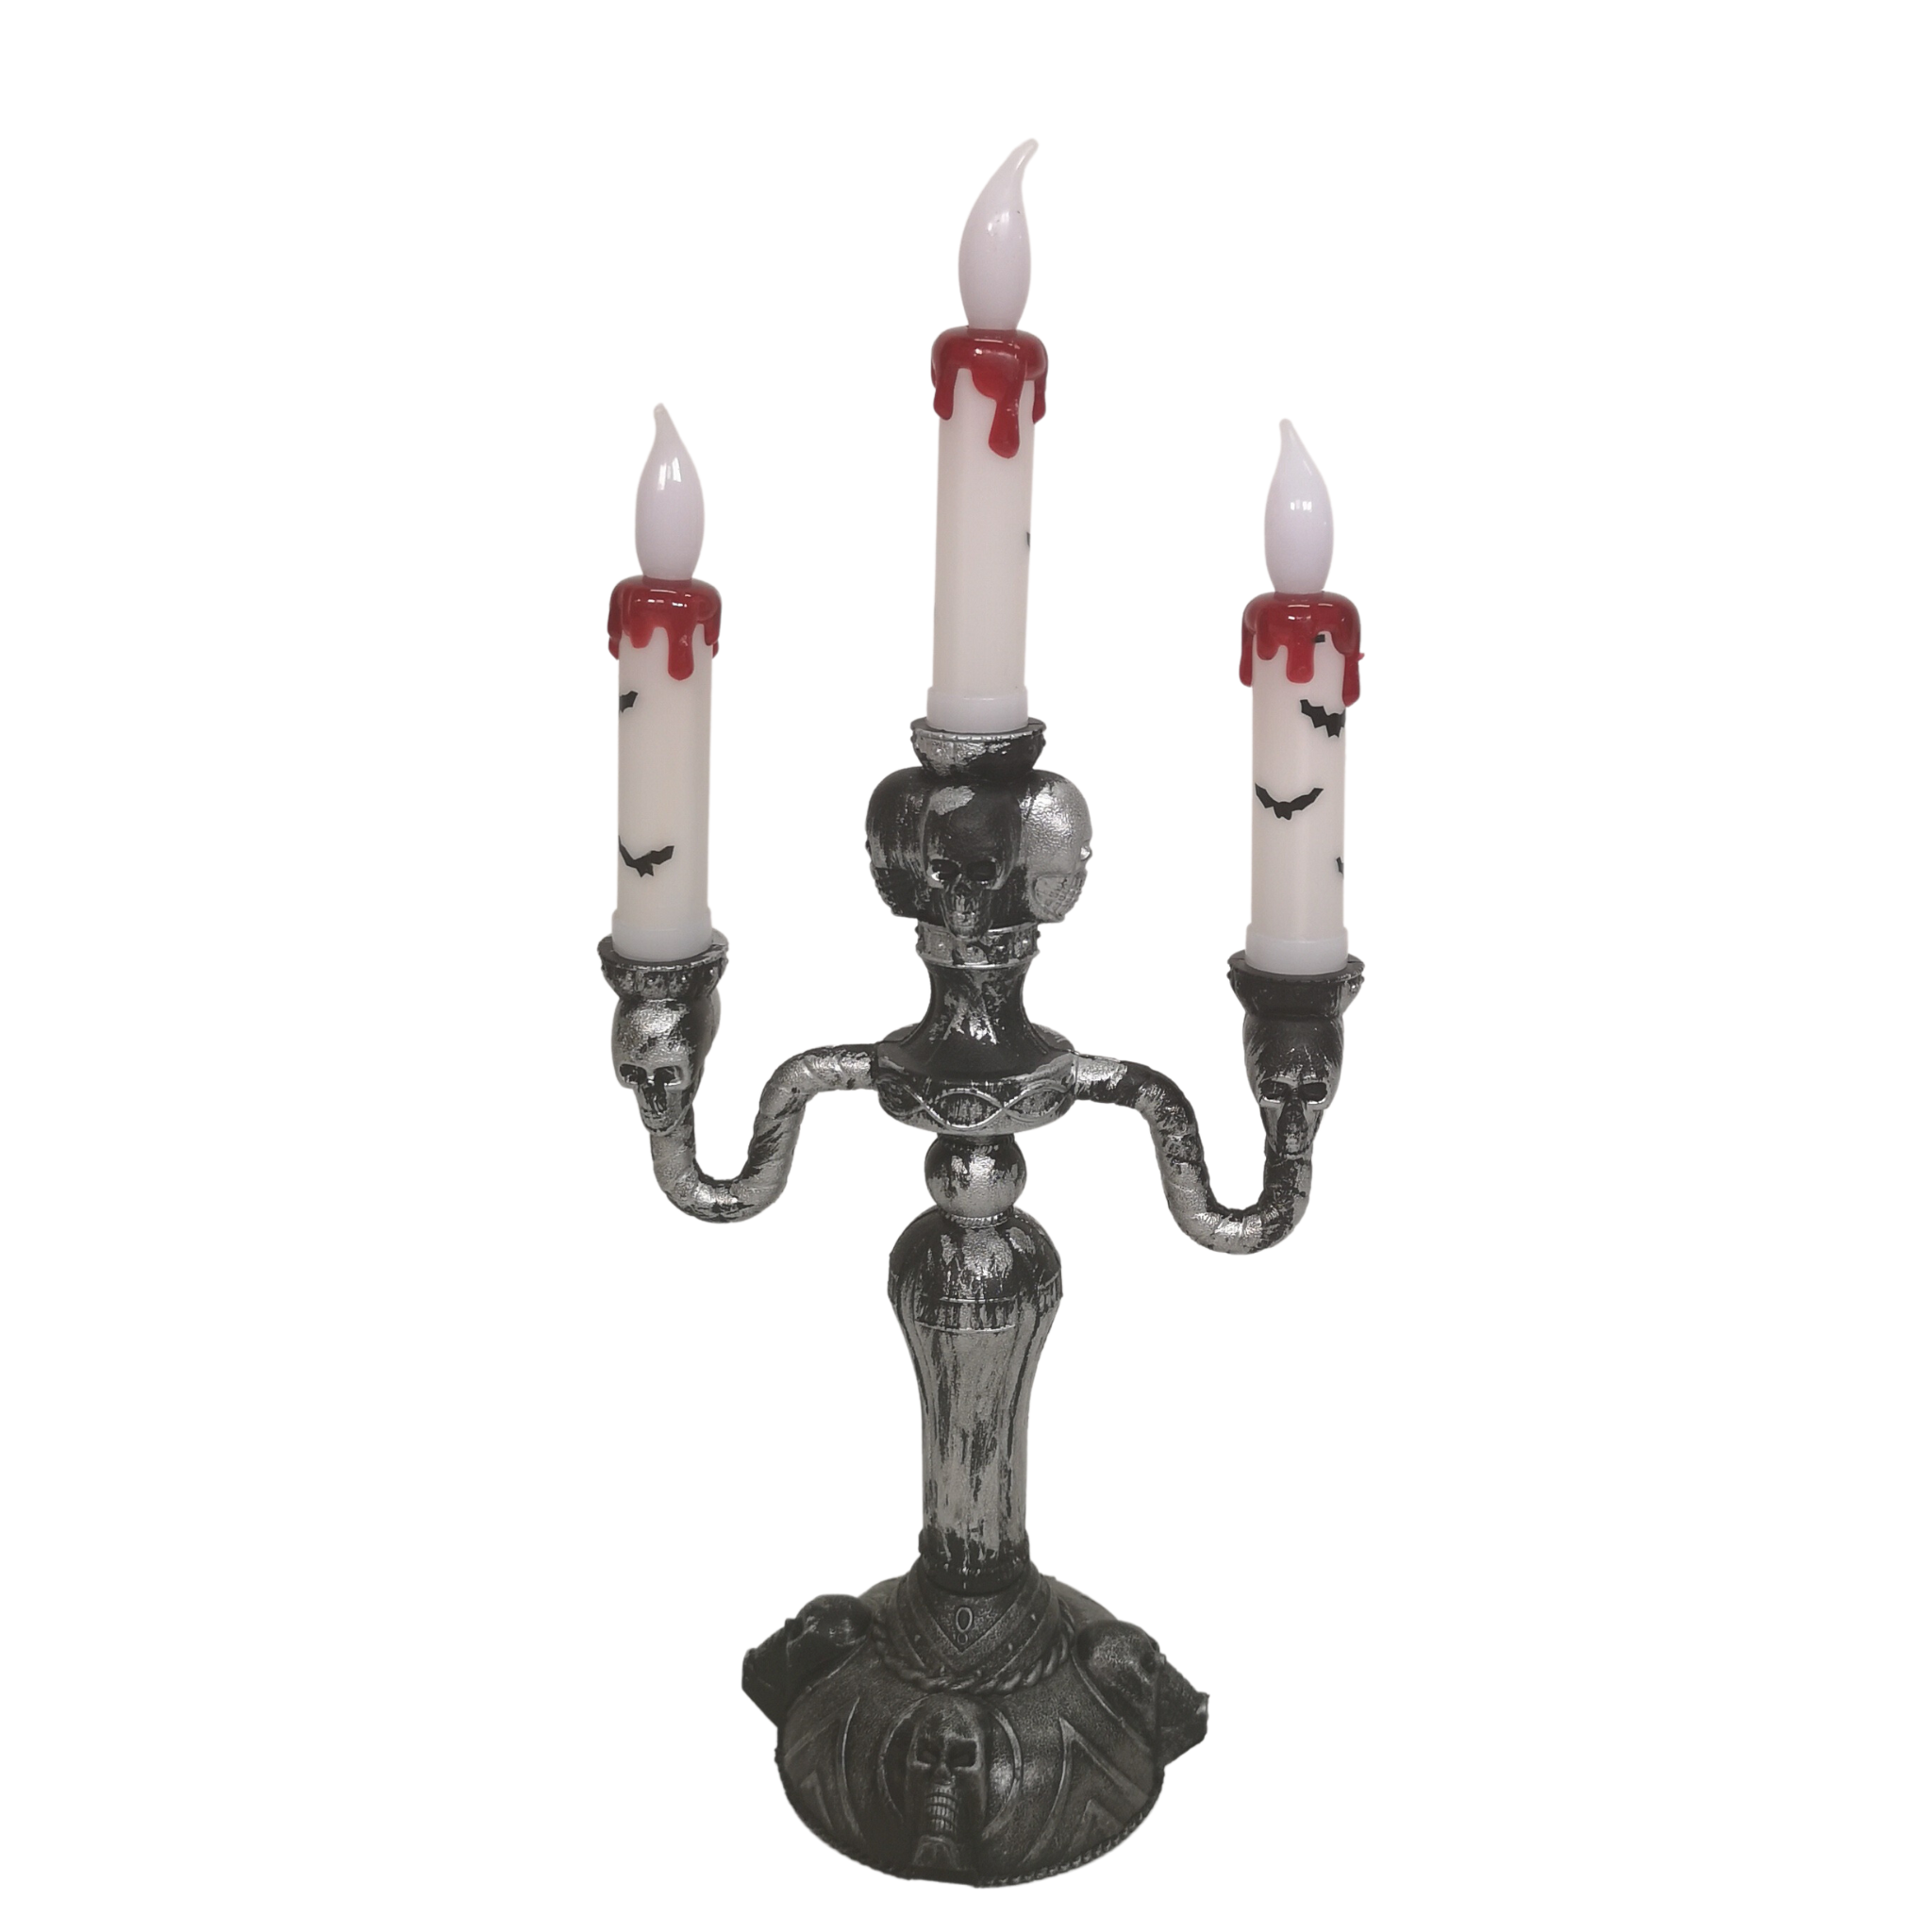 LED Light up triple candlestick Scary Halloween Decoration